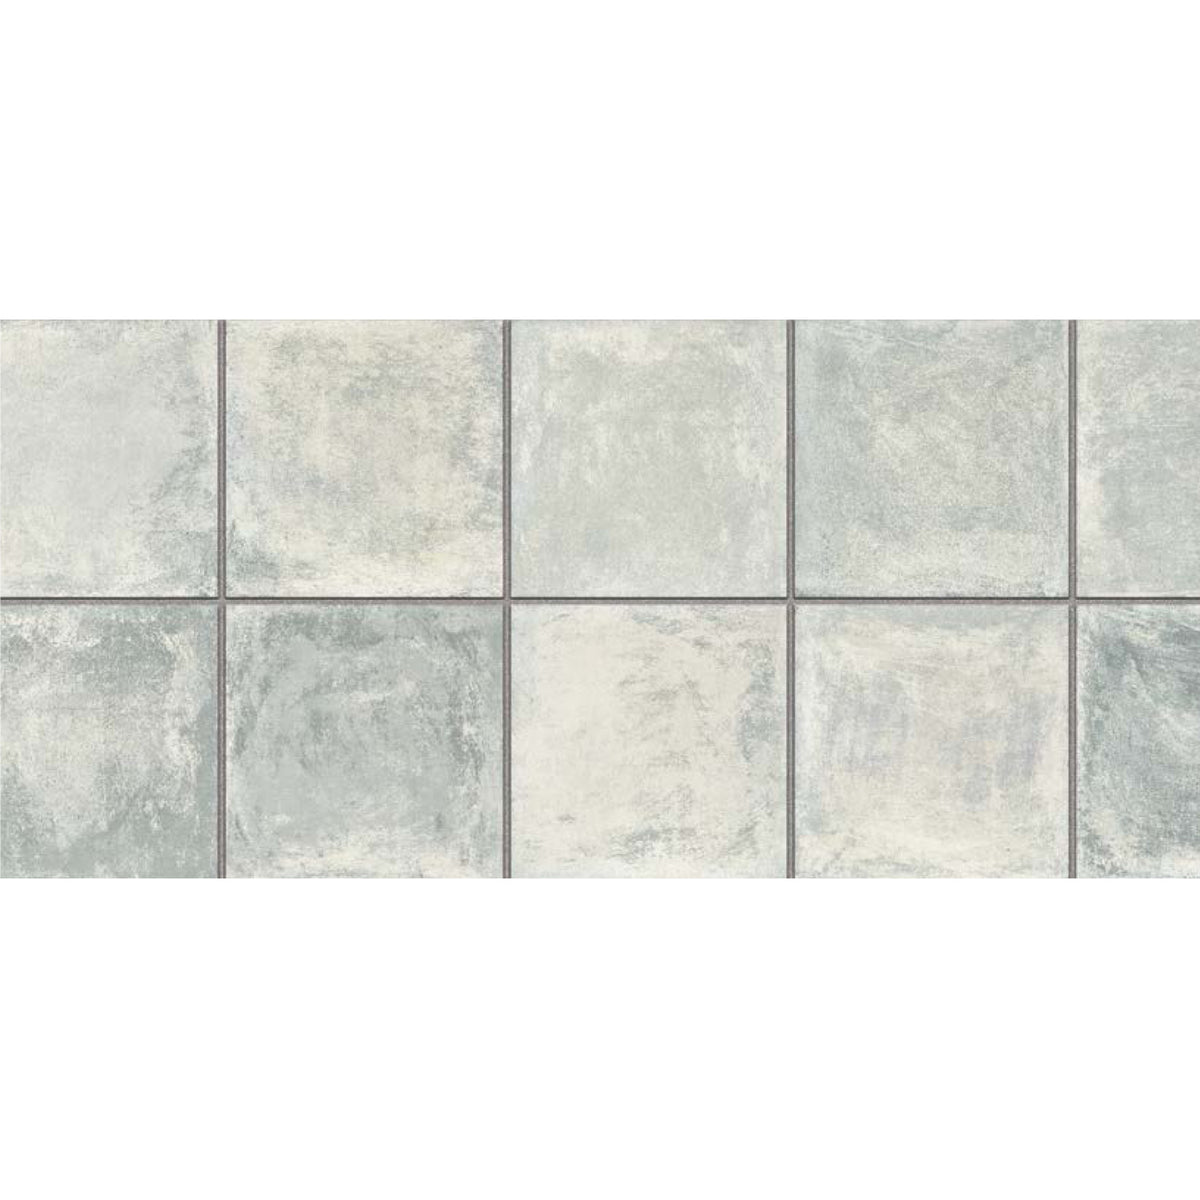 Topcu - Clay 8 in. x 8 in. Porcelain Tile  - Fossil